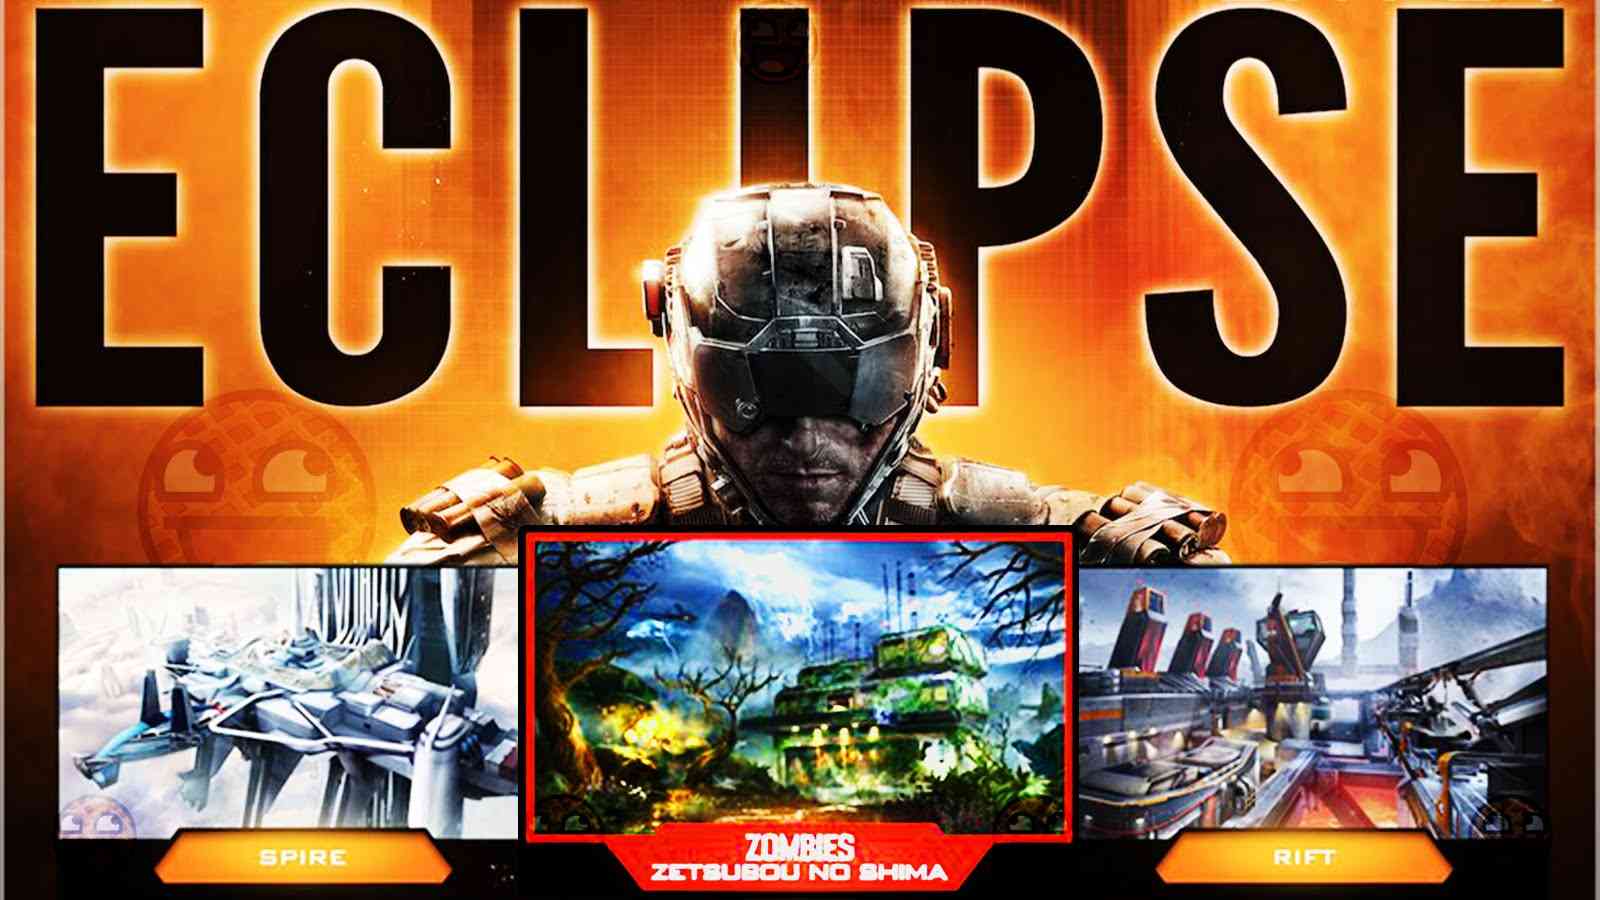 Call Of Duty Black Ops 3 Eclipse Multiplayer Trailer